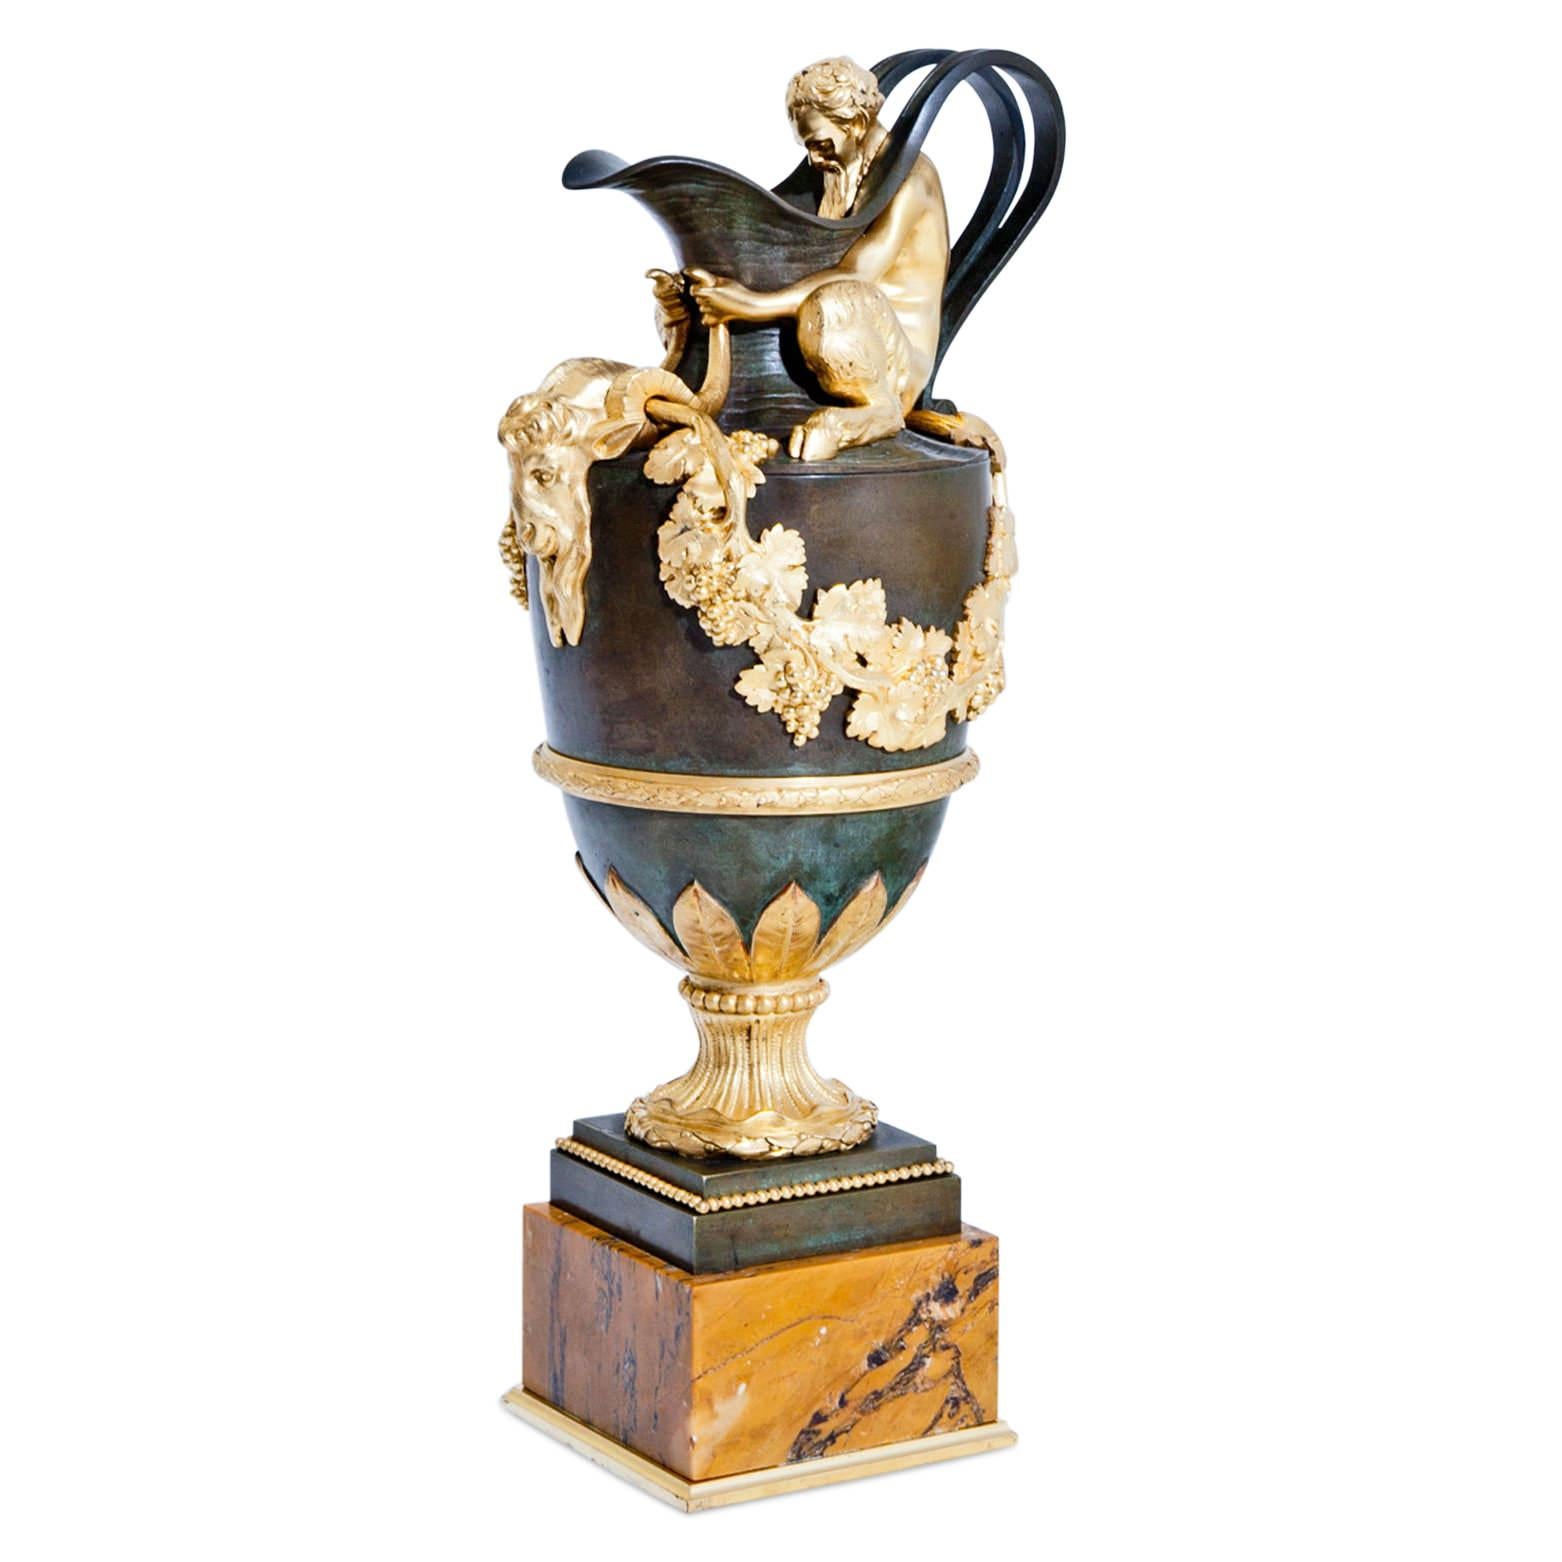 Pair of impressive jugs, standing on square bronze bases with firegilt pearl molding above square beige marble plinths. The bronzed jugs stand on a waisted round firegilt foot with laurel wreath and stylized leaf décor. The jugs have a classical